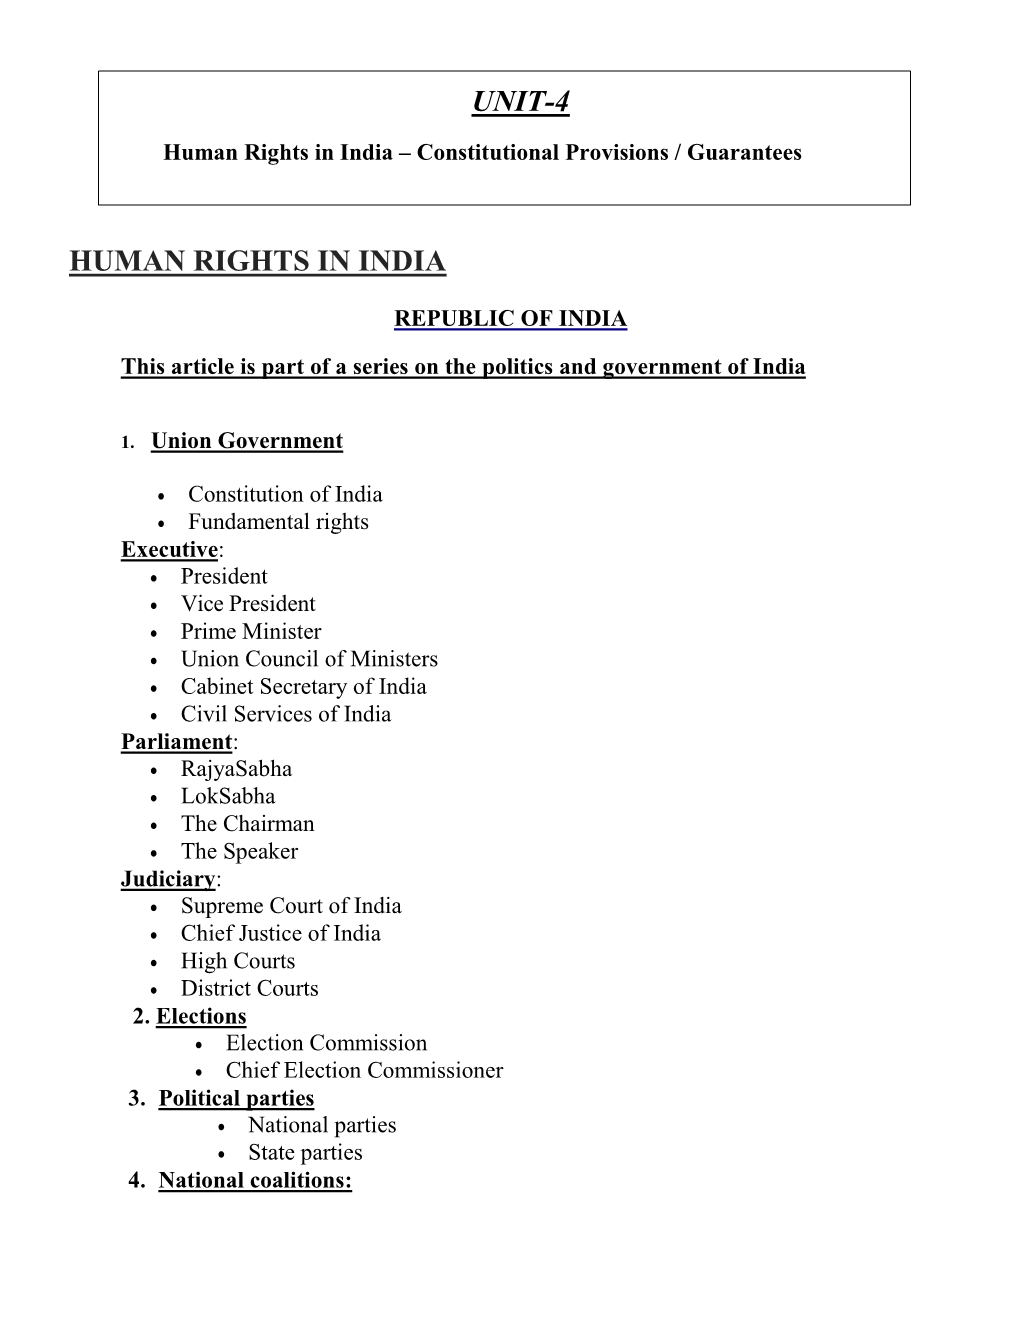 Human Rights in India Unit-4